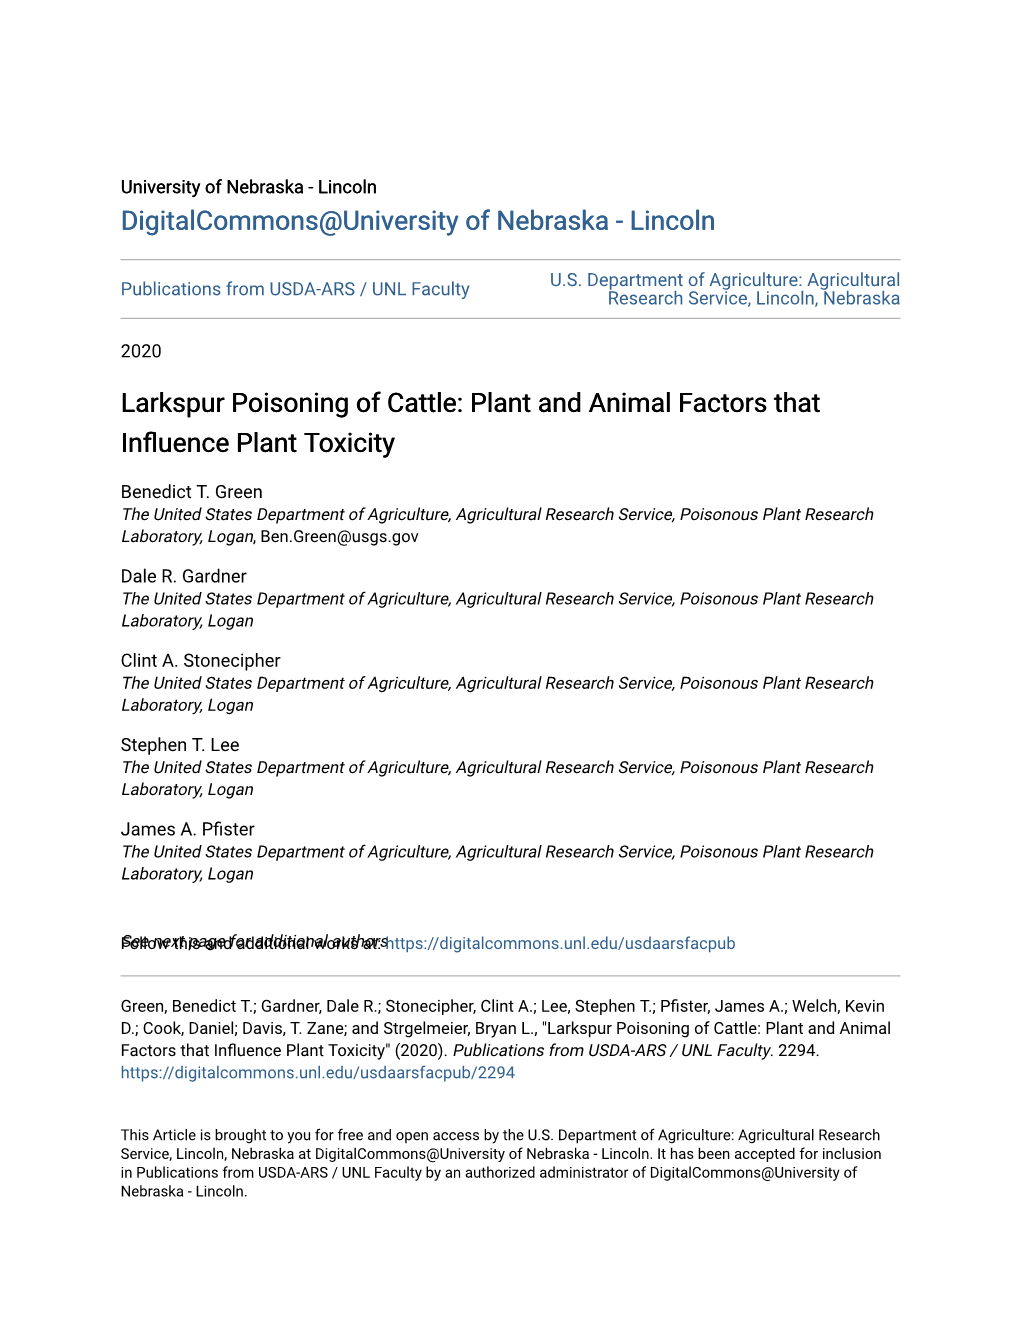 Larkspur Poisoning of Cattle: Plant and Animal Factors That Influence Plant Toxicity by Benedict T